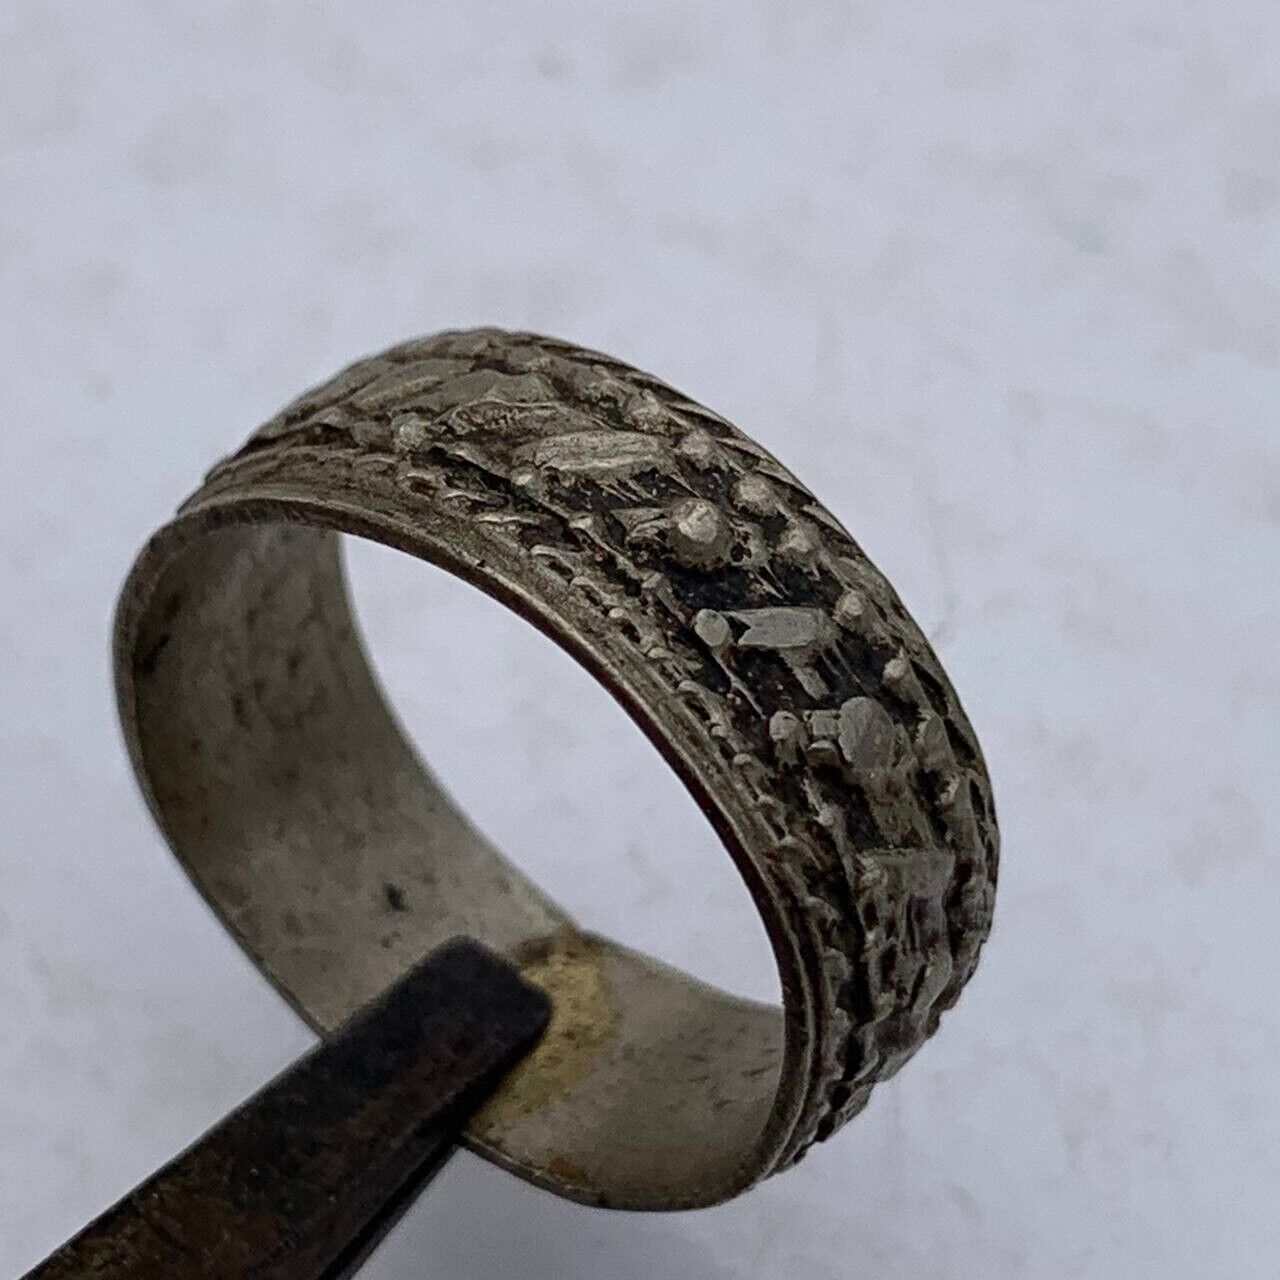 WEARABLE ANCIENT VIKING NORSE SILVER TWISTED RING 900-1100 AD